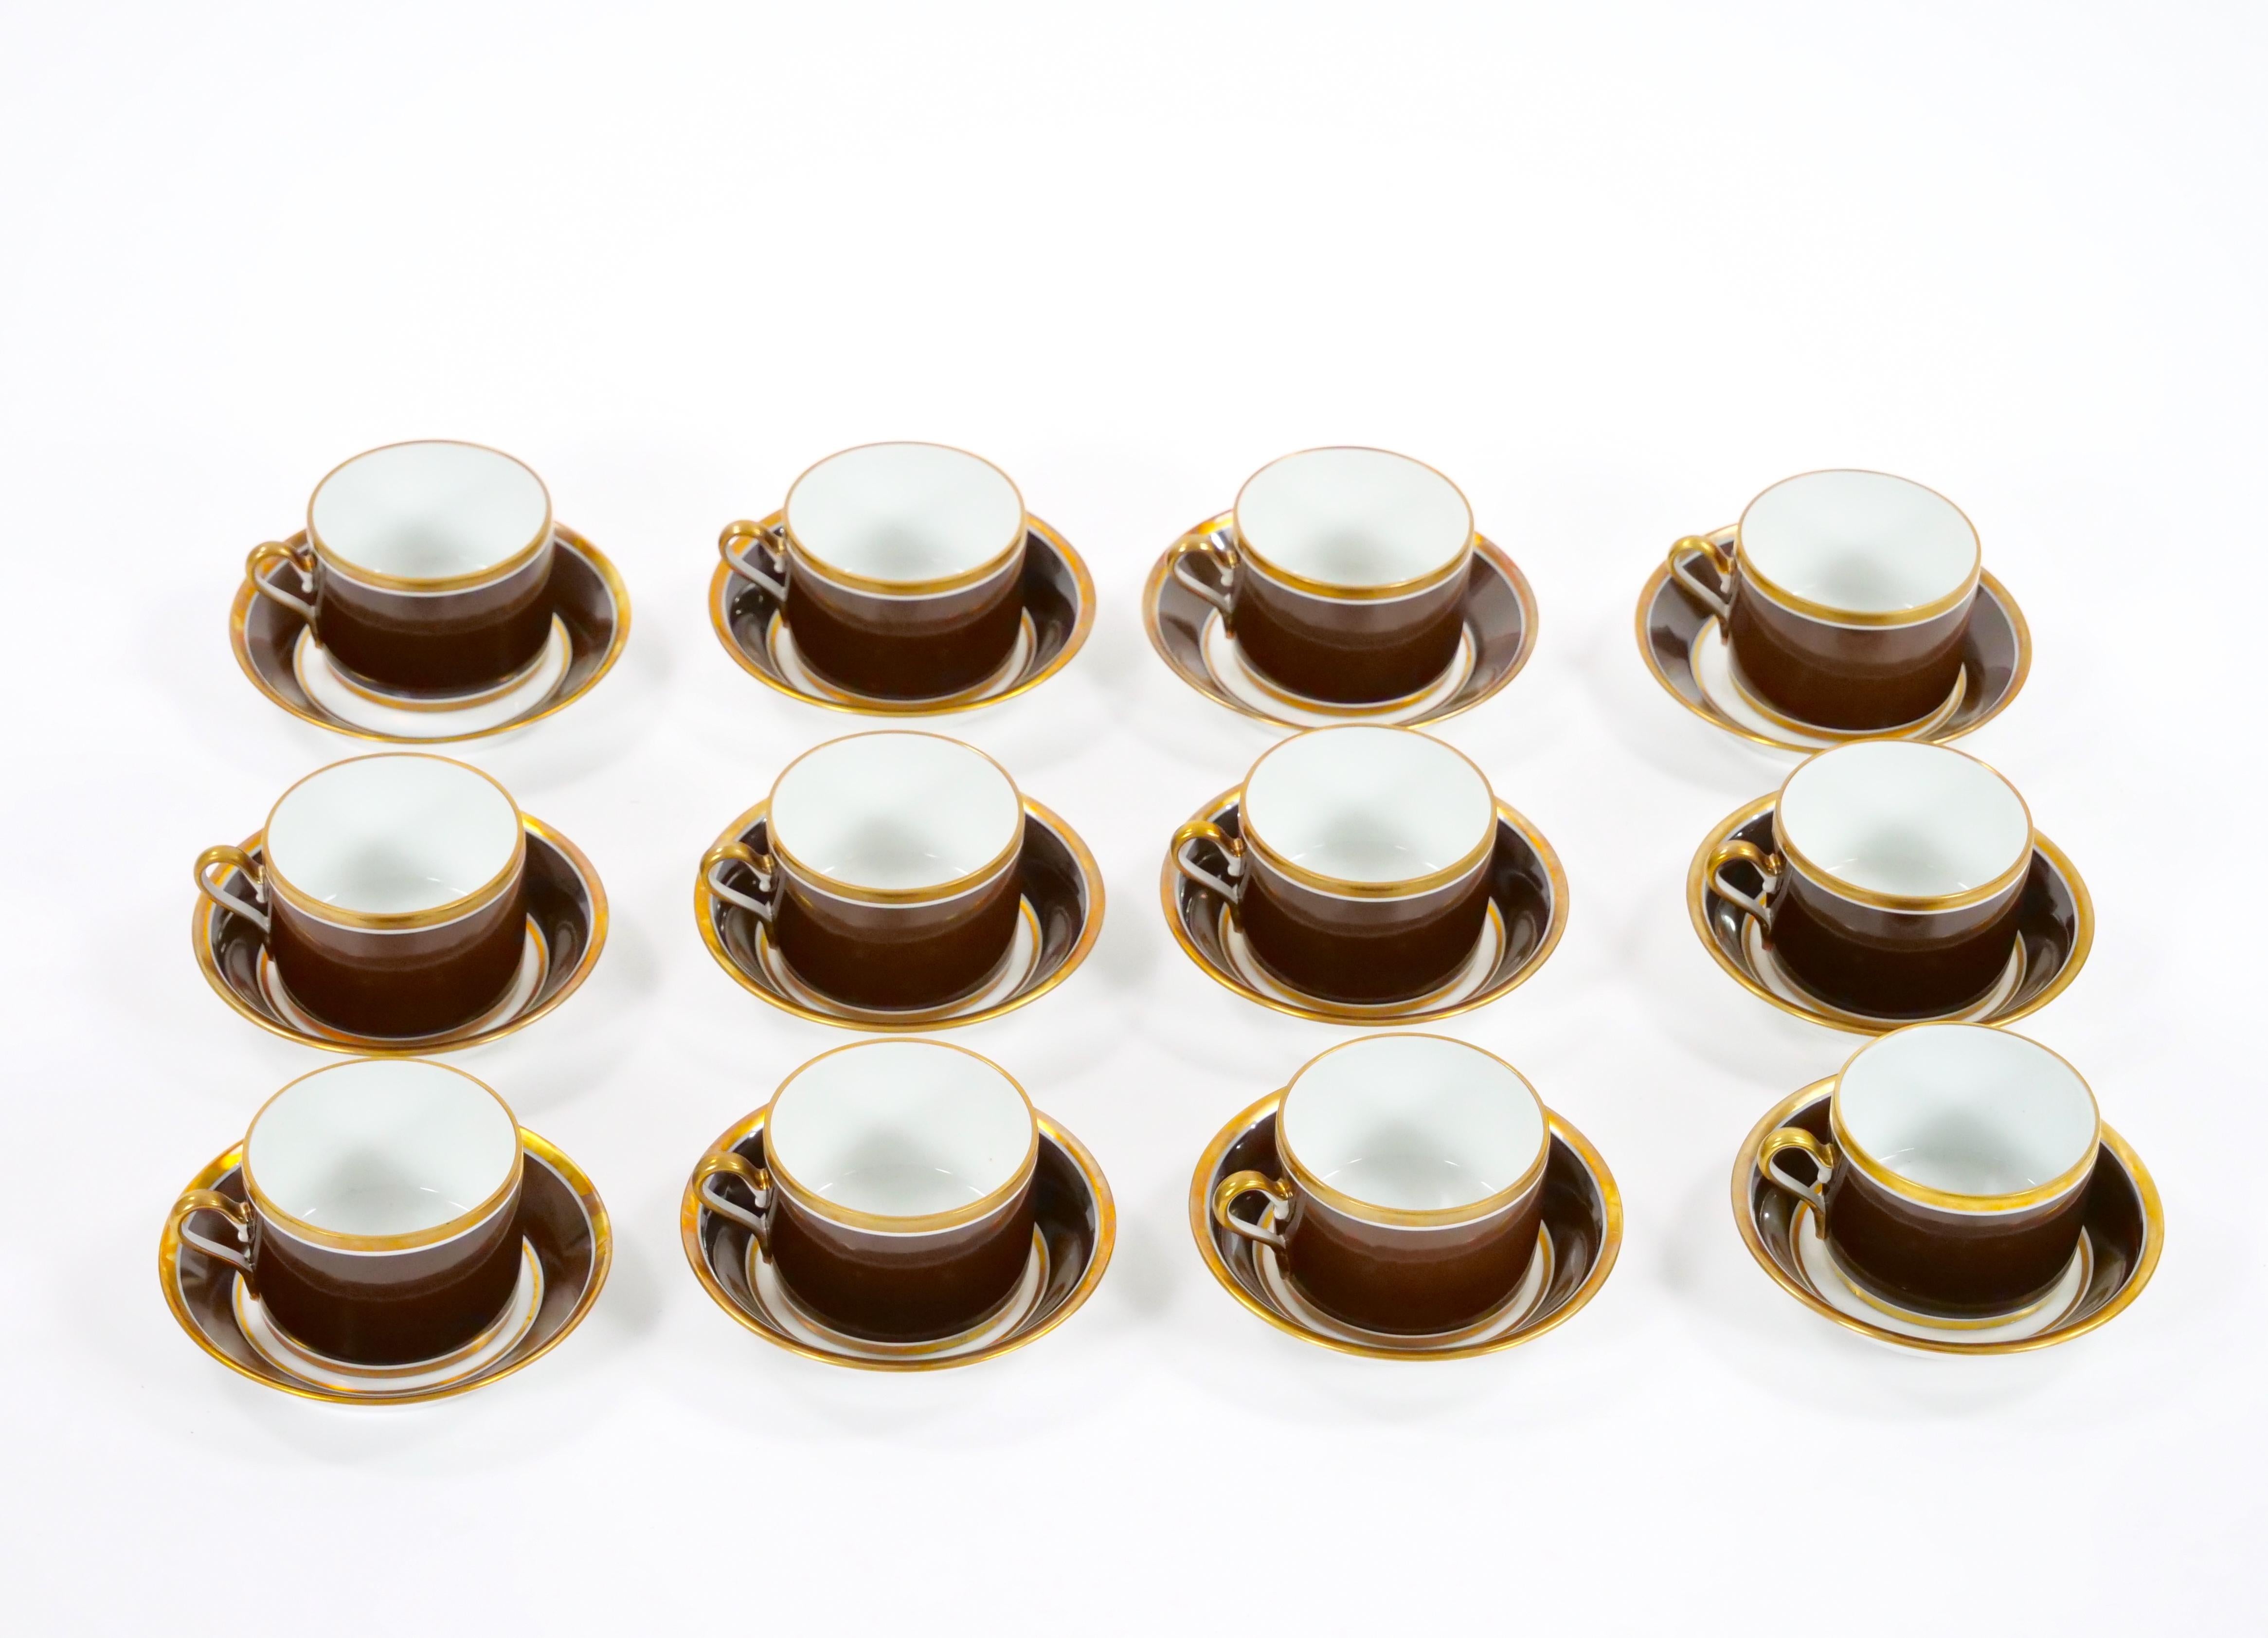 Richard Ginori Brown & Gold Trimmed Extensive Dinnerware Service Of 99 Pieces For Sale 5